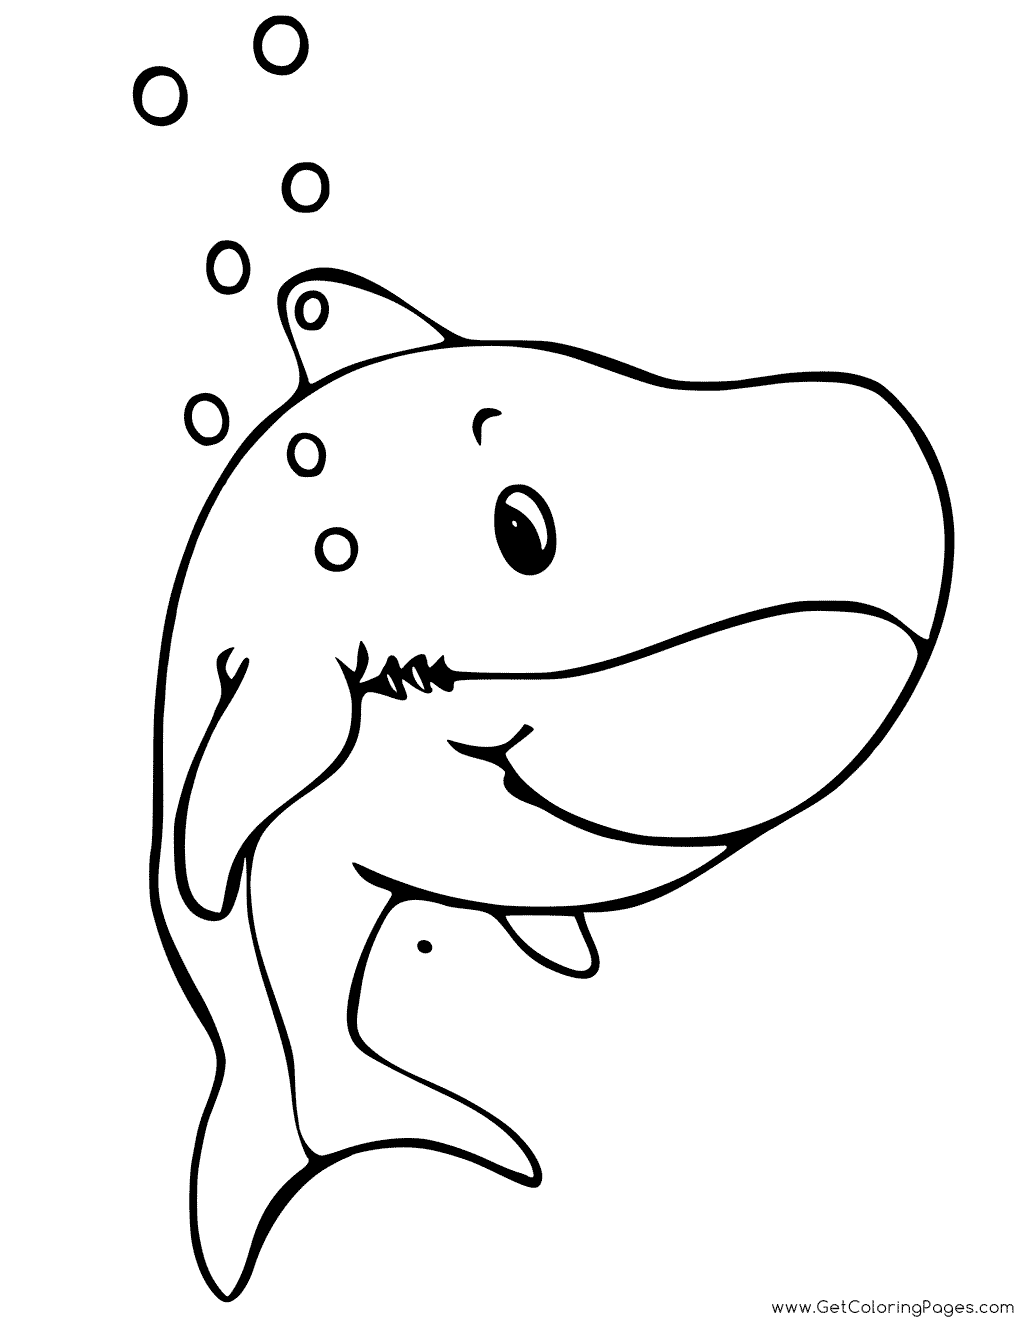 Baby Shark Coloring Pages at GetColorings.com | Free ...